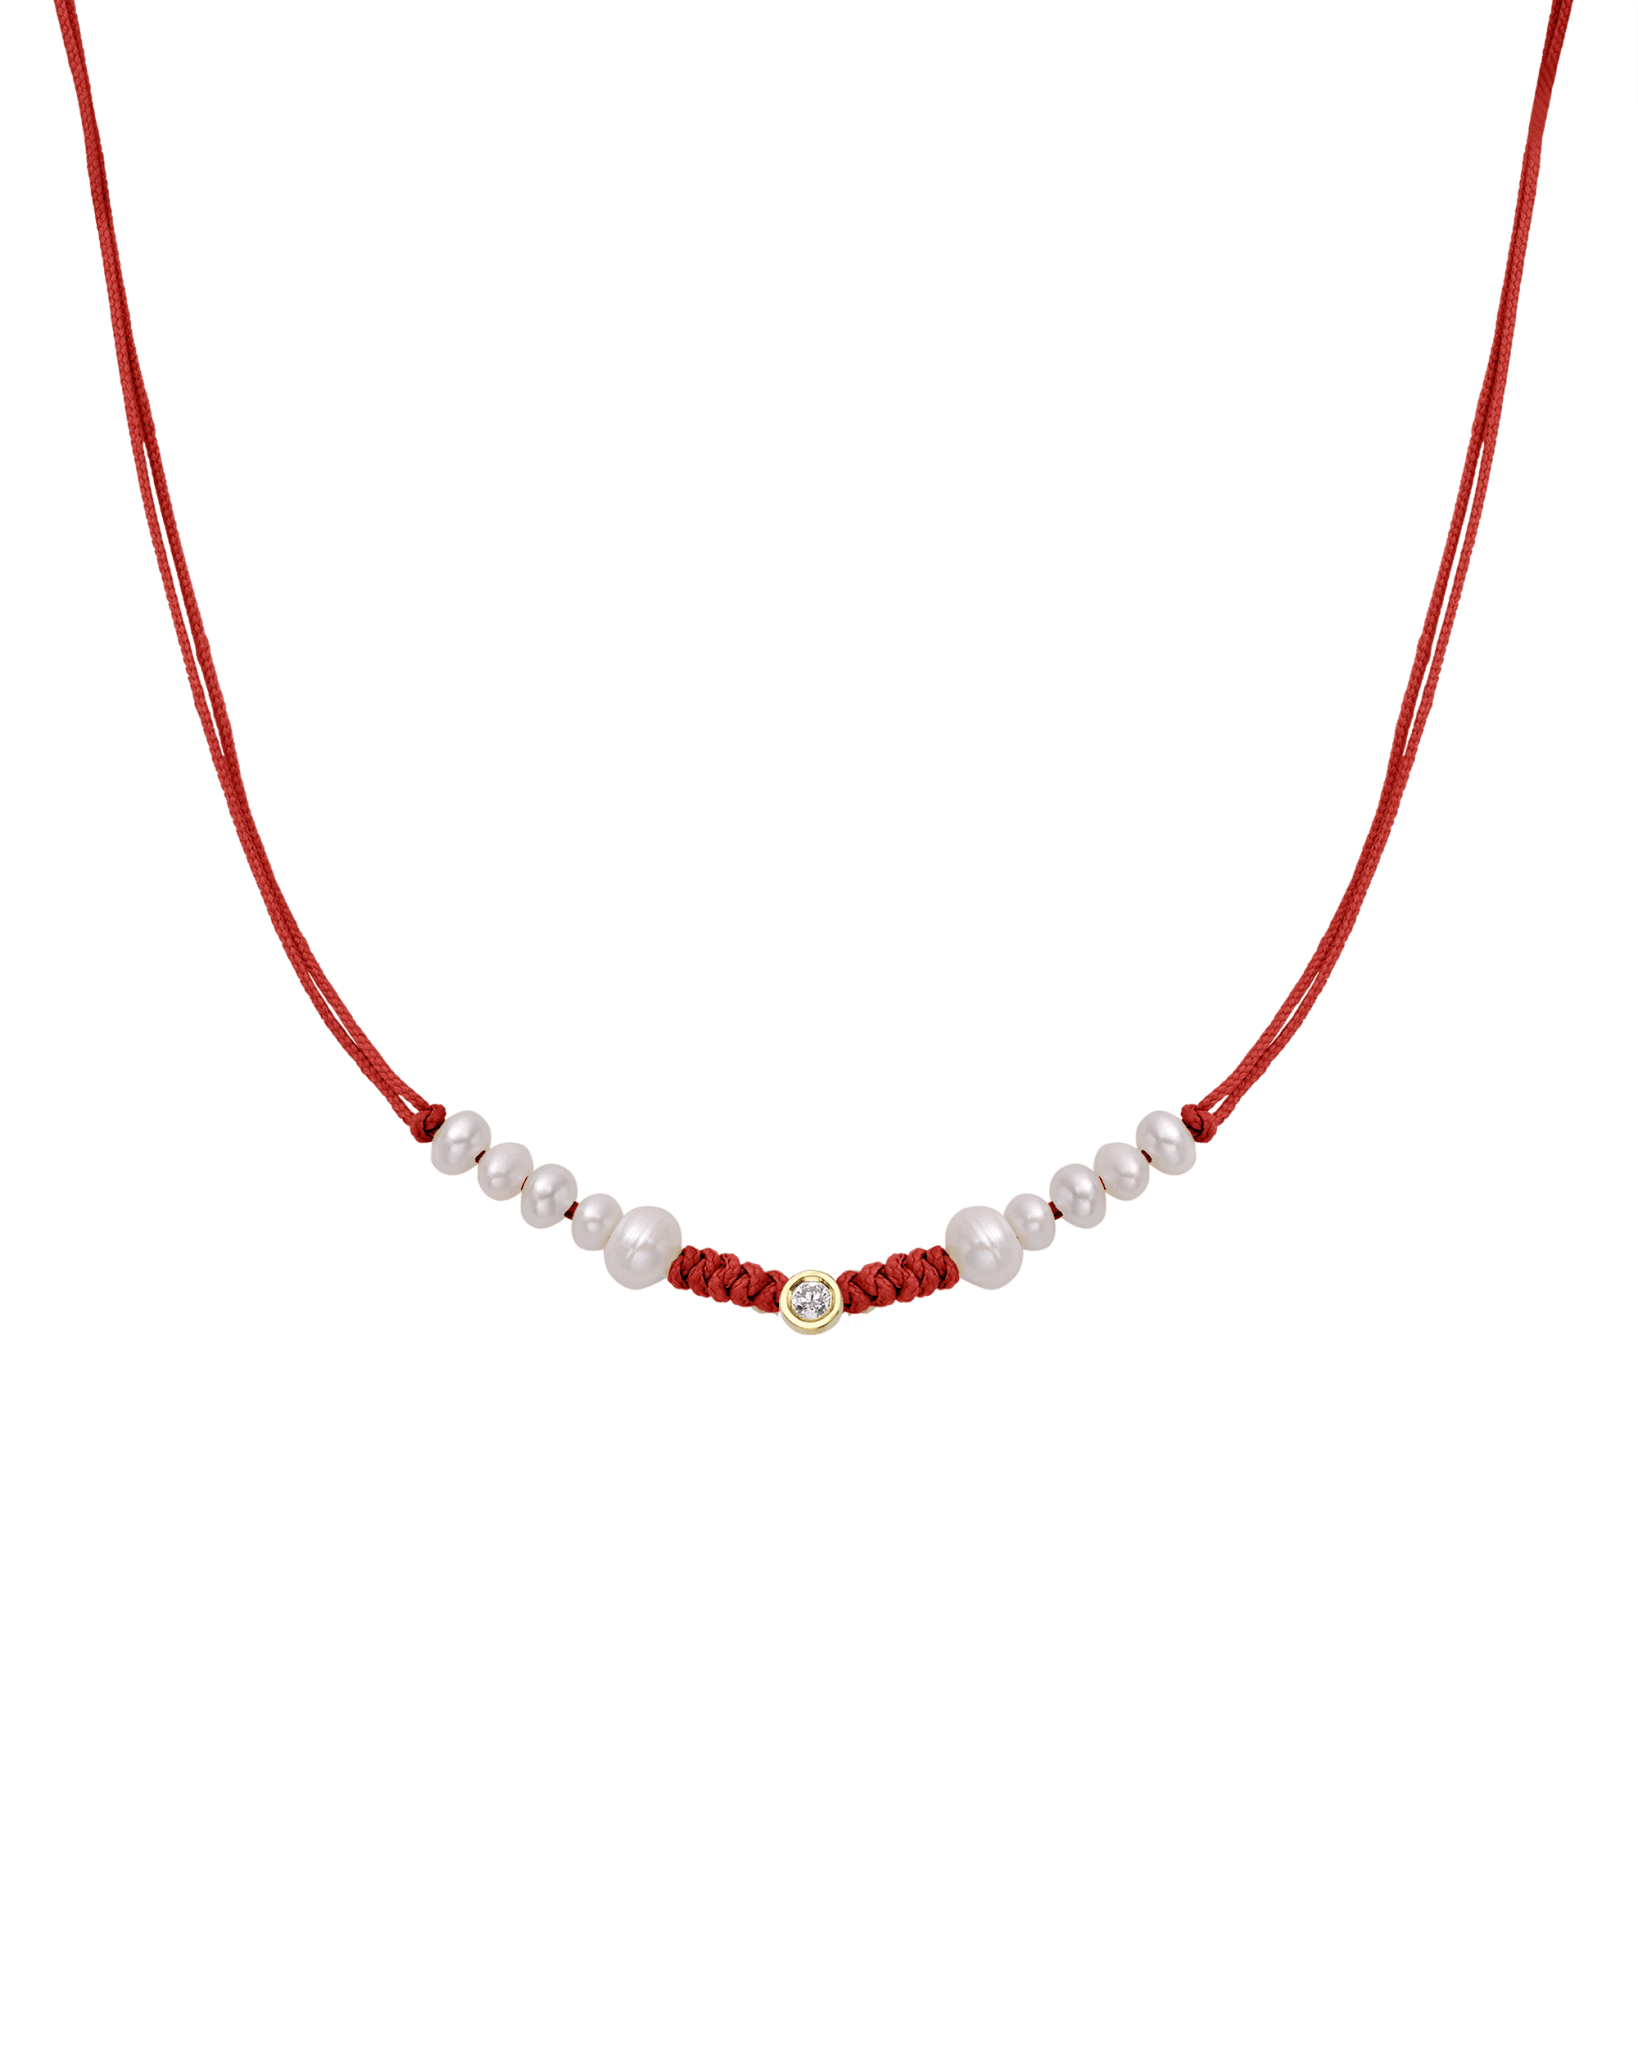 Ten Natural Pearl String of Love Necklace - 14K Yellow Gold Necklaces 14K Solid Gold Red Medium: 0.04ct 